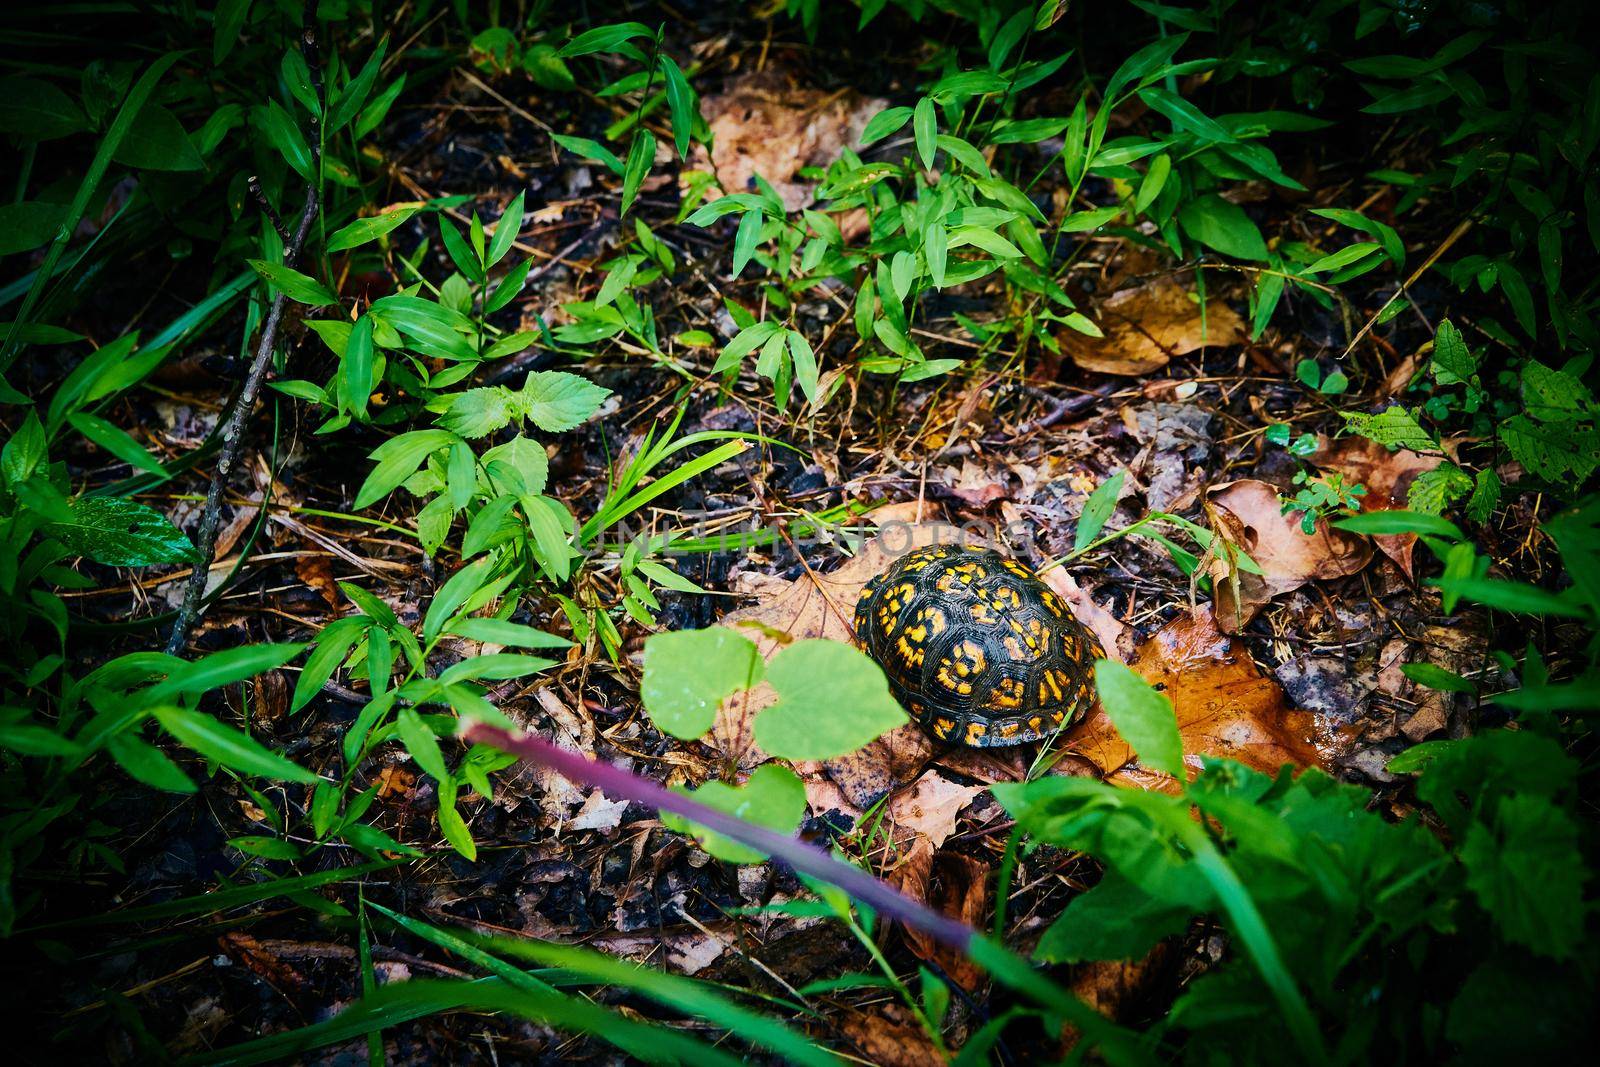 Image of Turtle with yellow-spotted shell in wet green forest on fall leaves